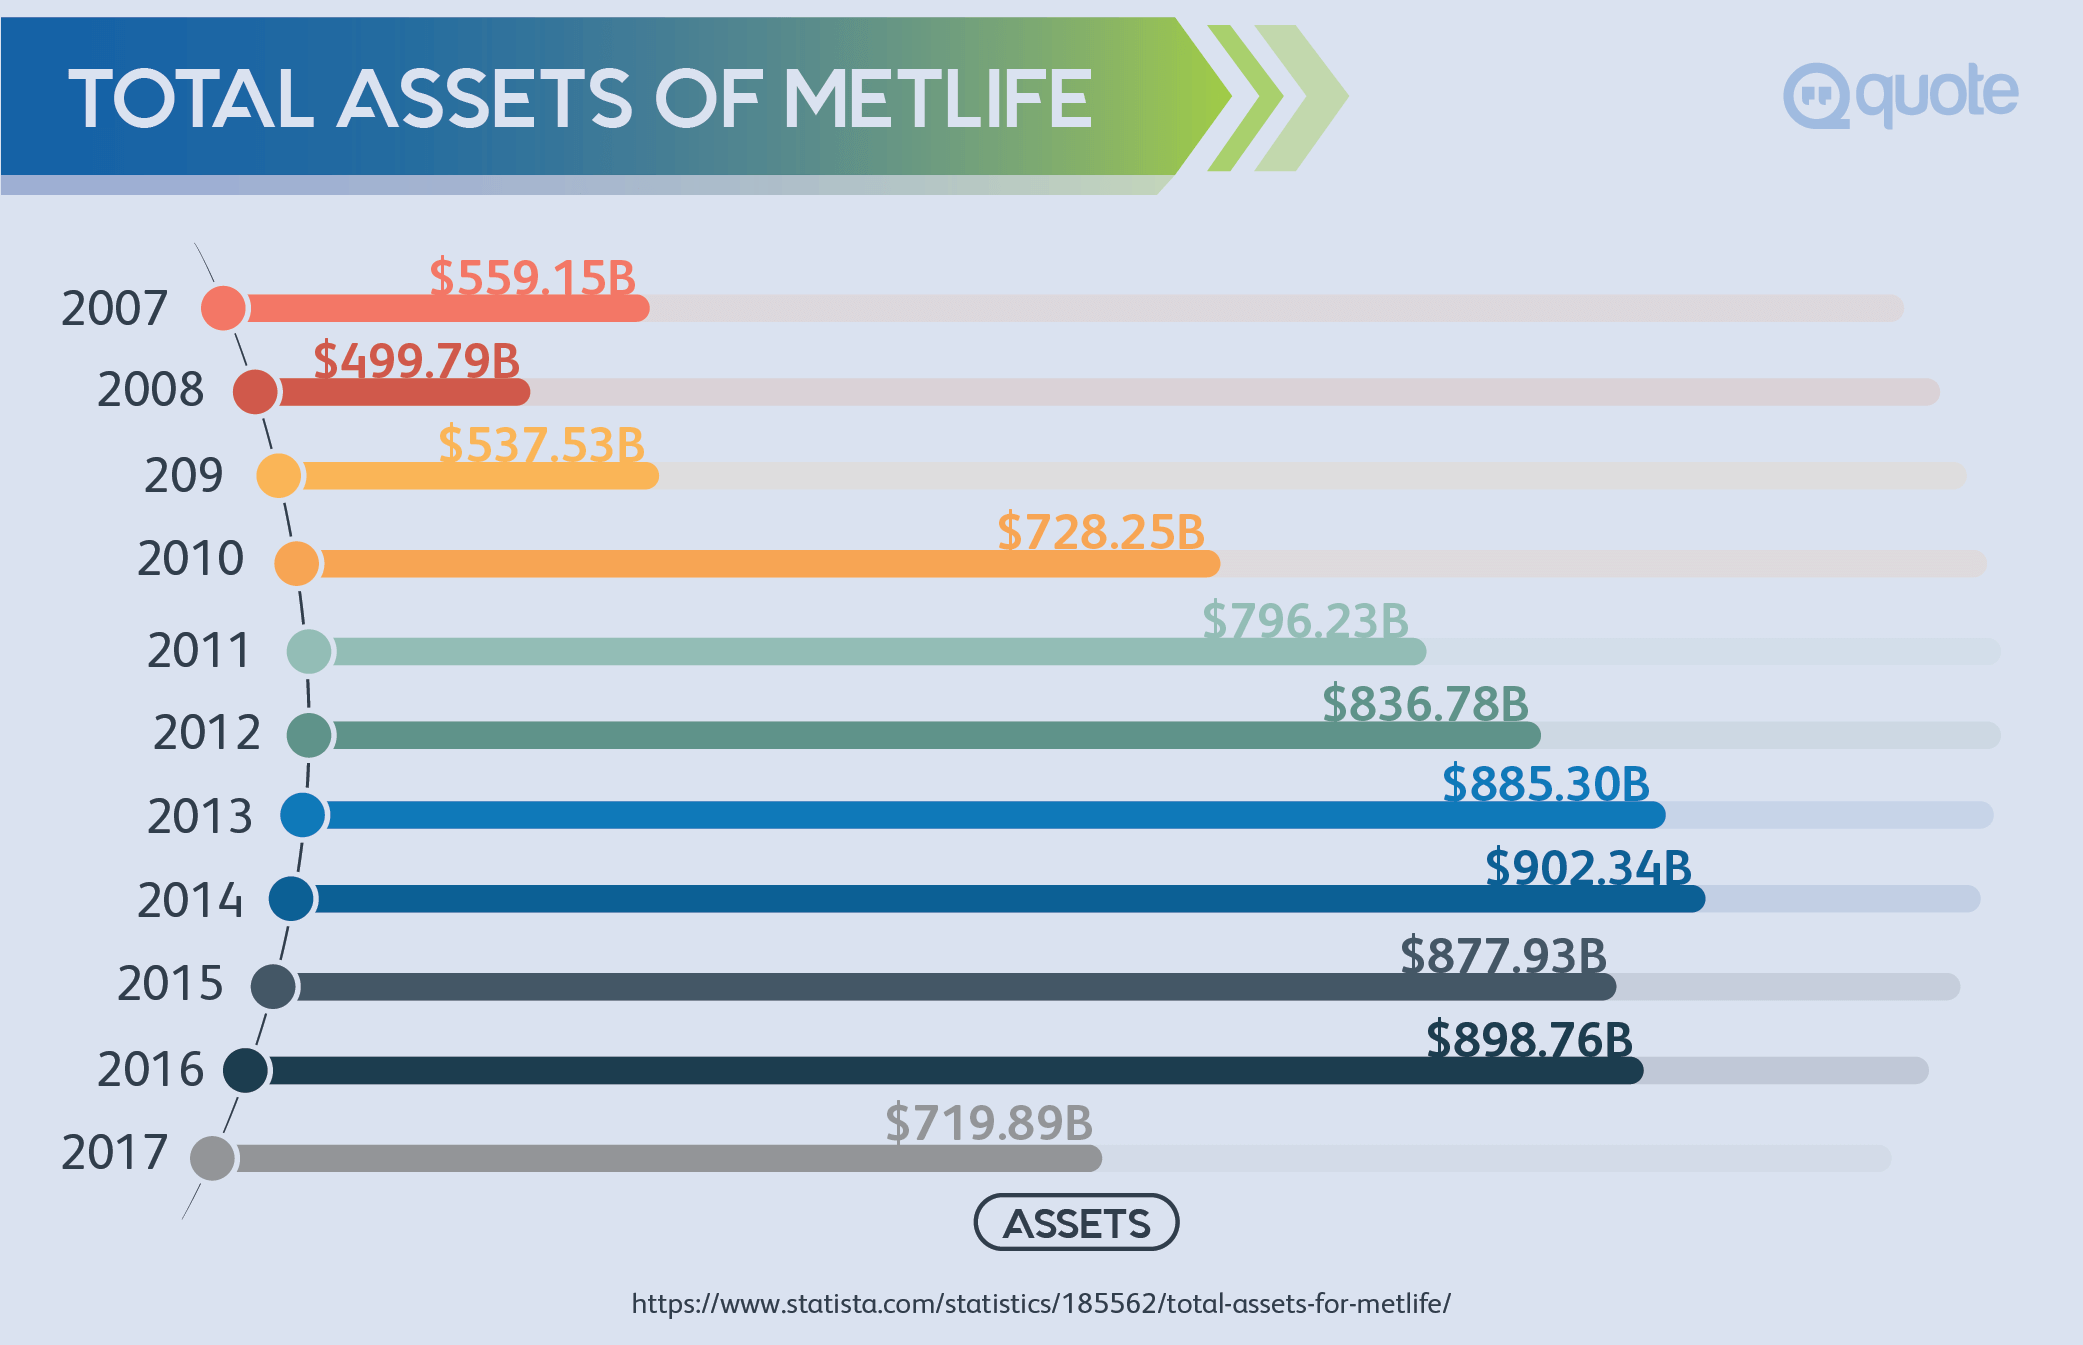 Total Assets of MetLife from 2007-2017